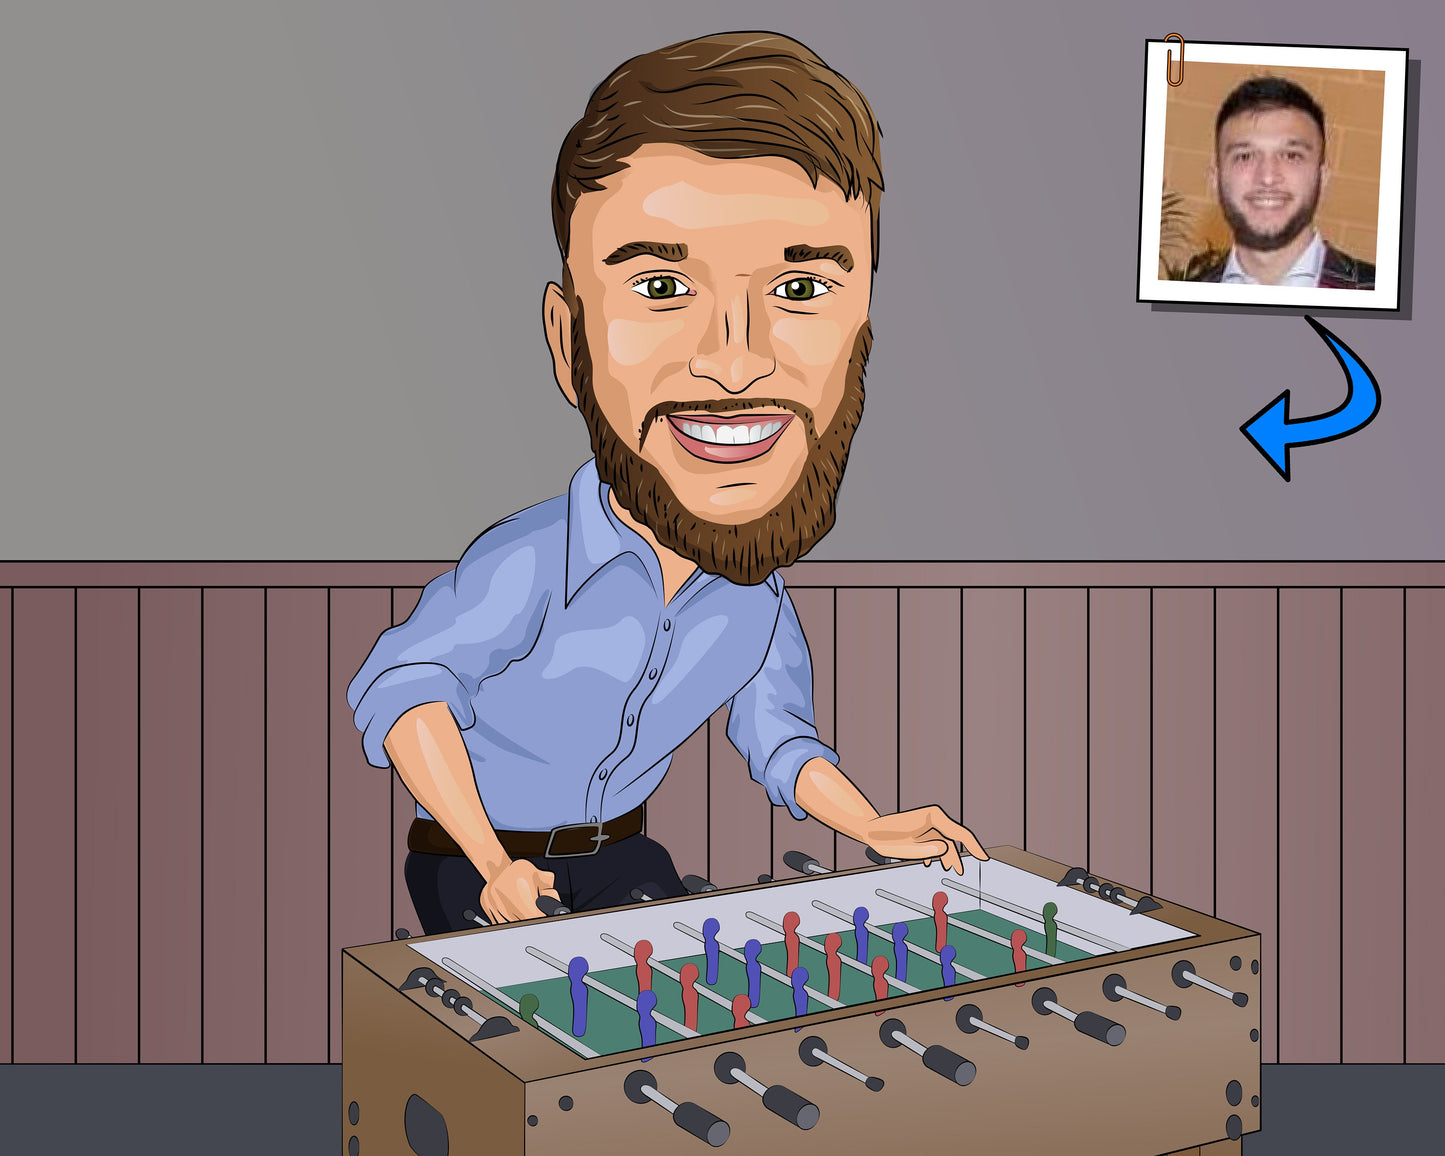 Foosball Player Gift - Custom Caricature From Photo/table football/foosball table